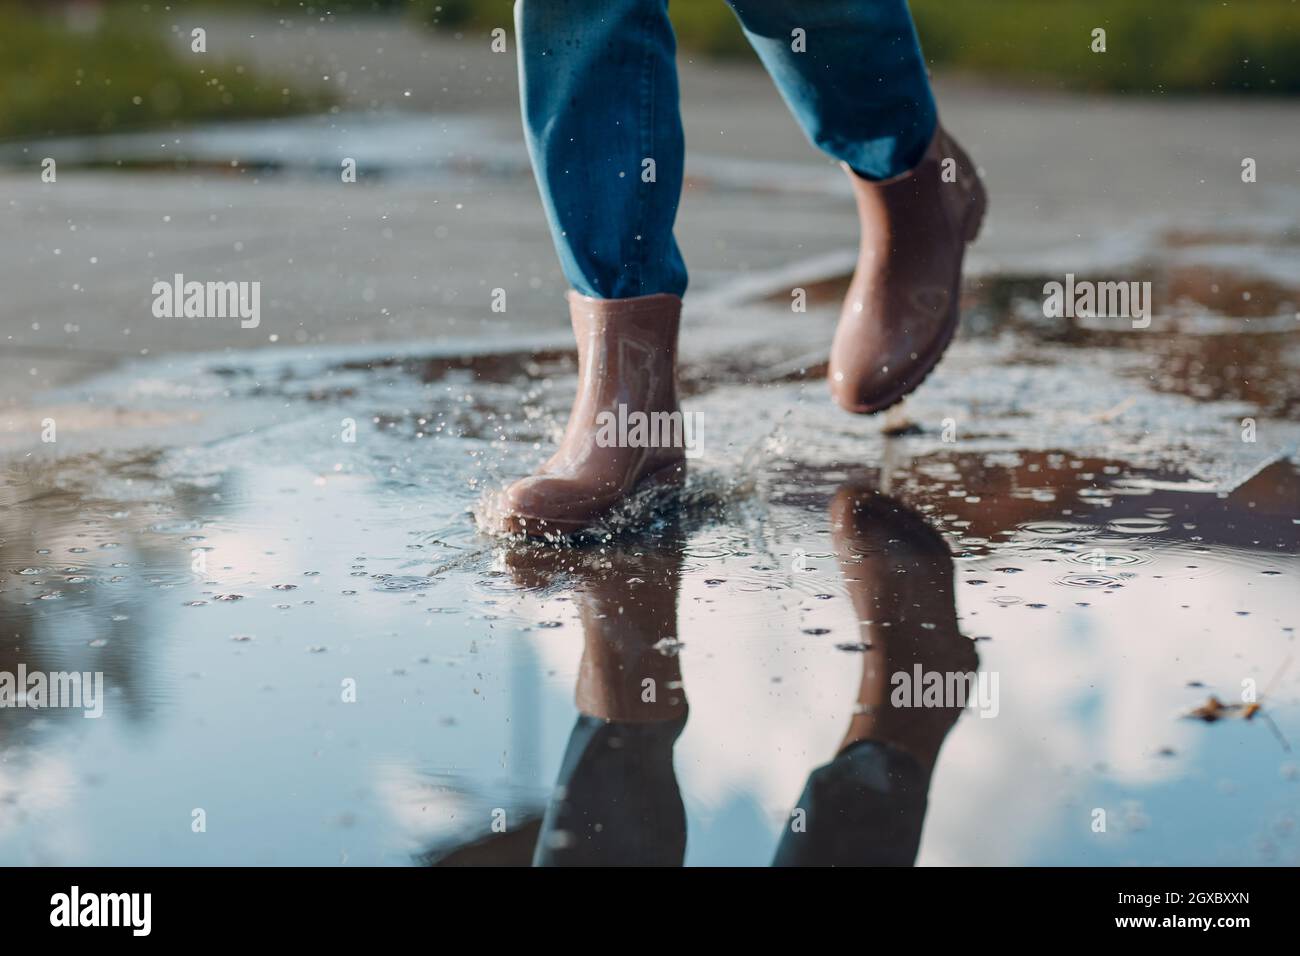 Woman wearing rain rubber boots walking running and jumping into puddle with water splash and drops in autumn rain. Stock Photo